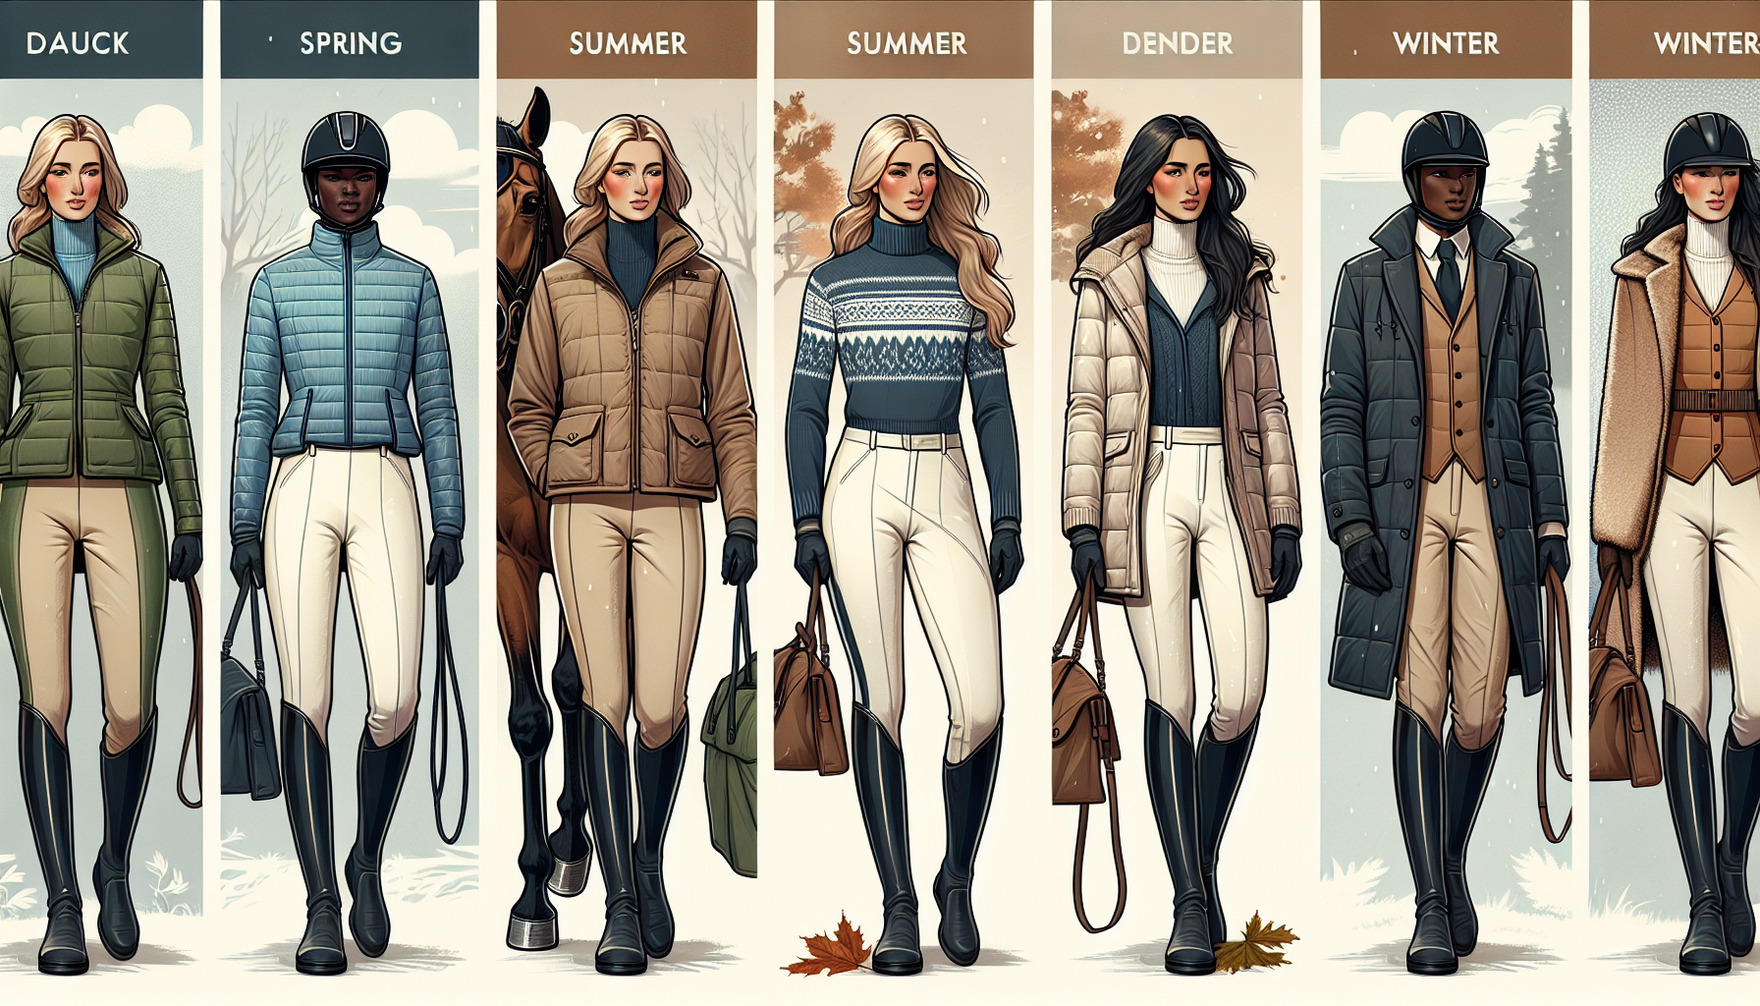 Depict a conceptual fashion spread titled 'Dress to Ride: Seasonal Equestrian Fashion for Every Climate'. Show four different scenes, each representing a different season and a climate appropriate out